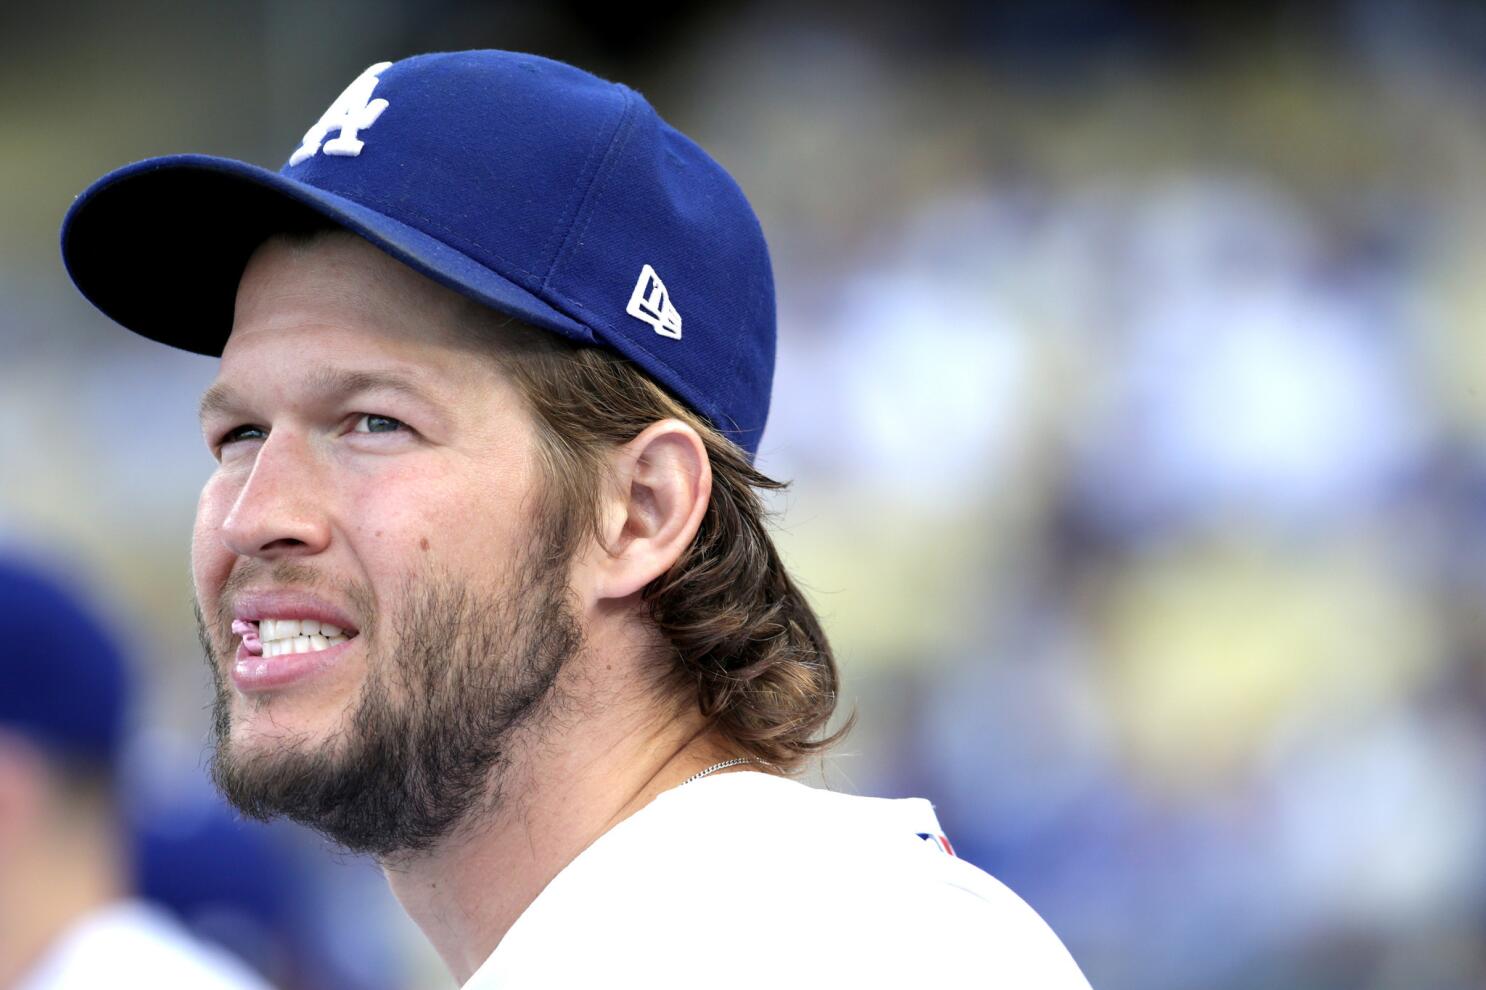 It has to be Clayton Kershaw in Game 4, but it's also a shame that